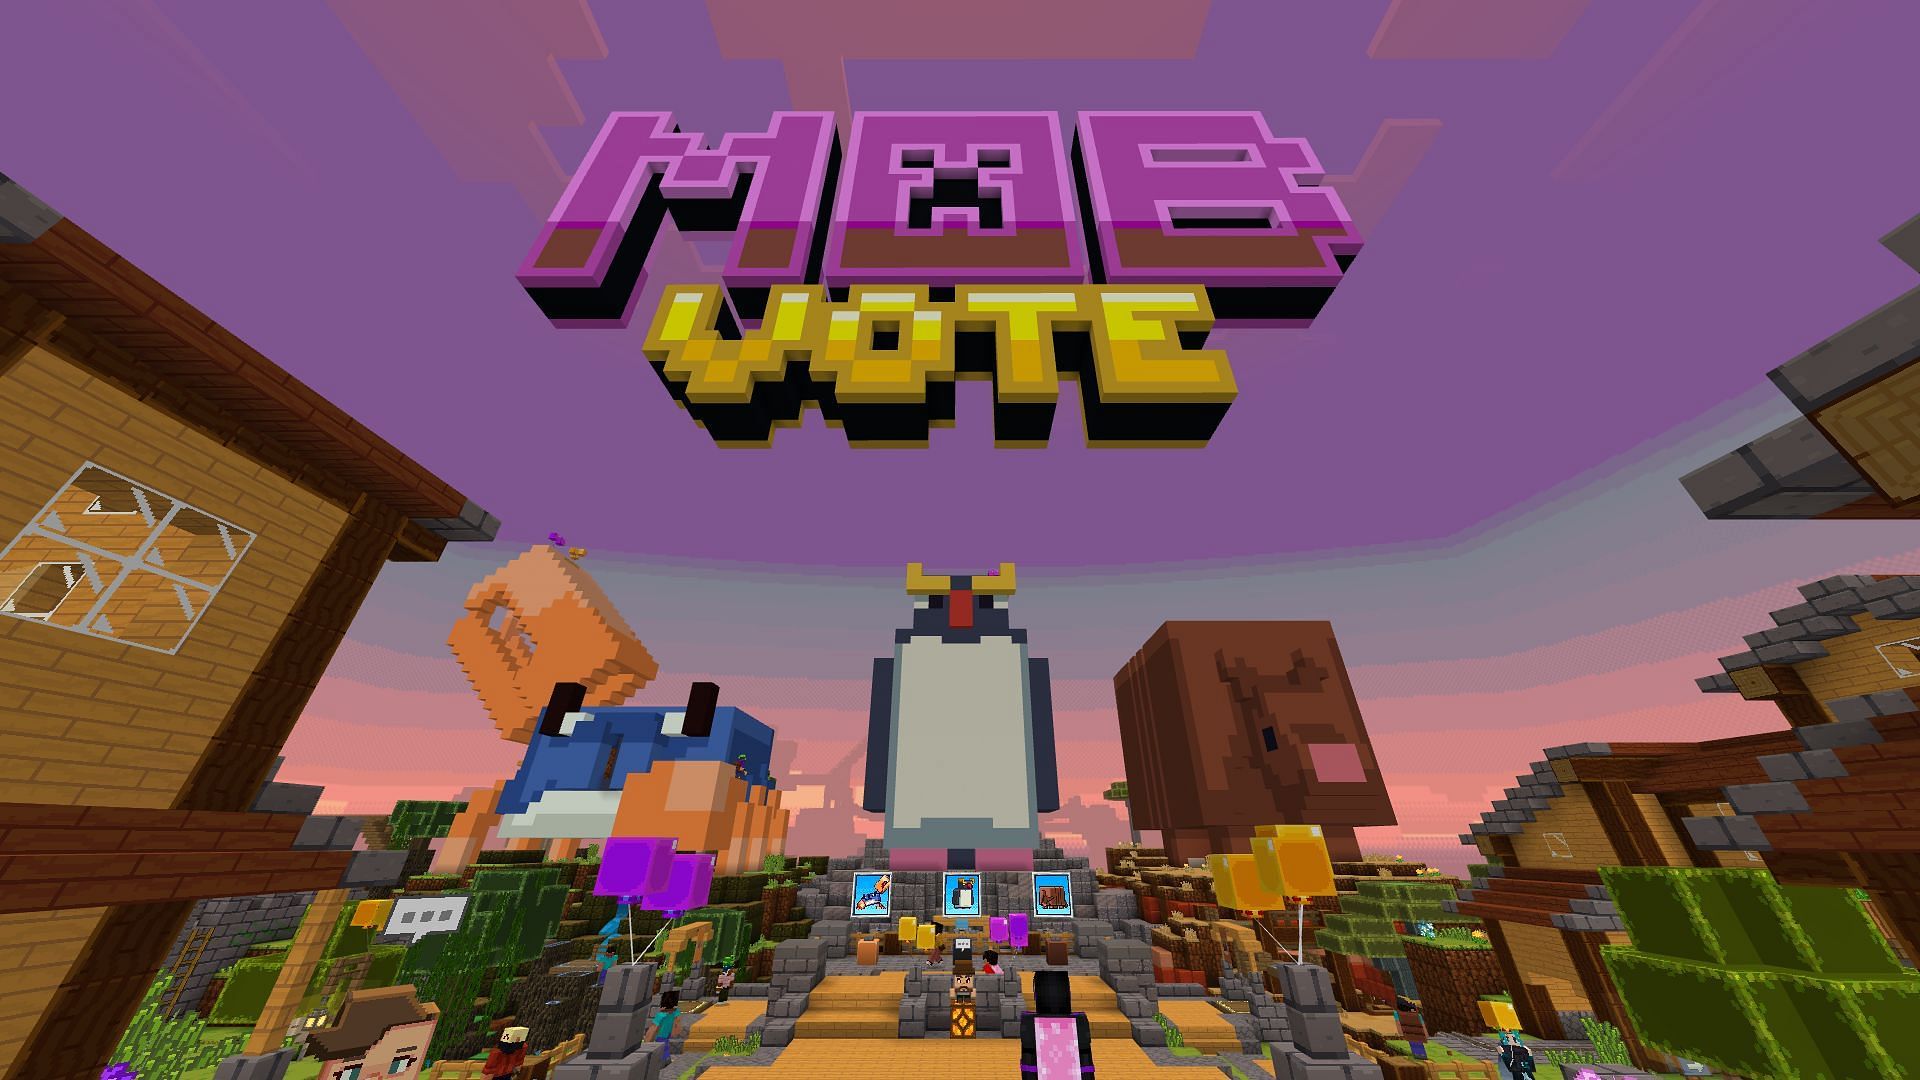 Minecraft Mob Vote Bedrock Edition server goes down for nearly an hour (Image via Mojang)